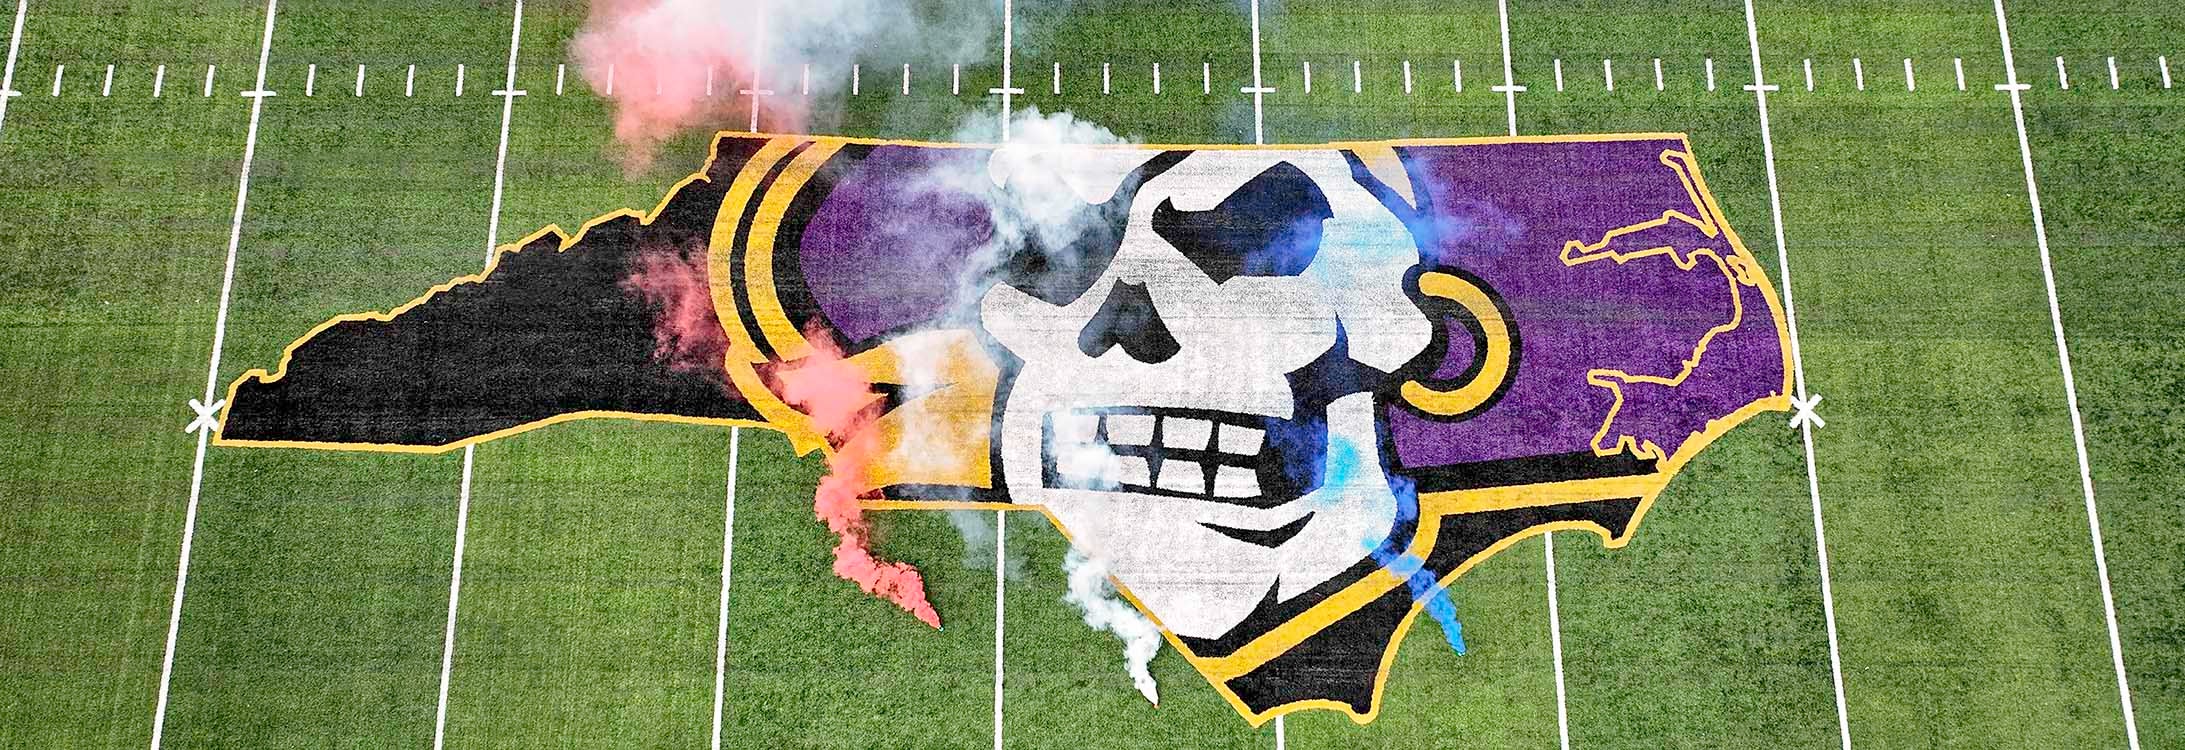 Red, white and blue smoke billow on the ECU football field over the Pirate decal. Supporters of East Carolina University raised a record $69.8 million during the 2021-22 fiscal year.